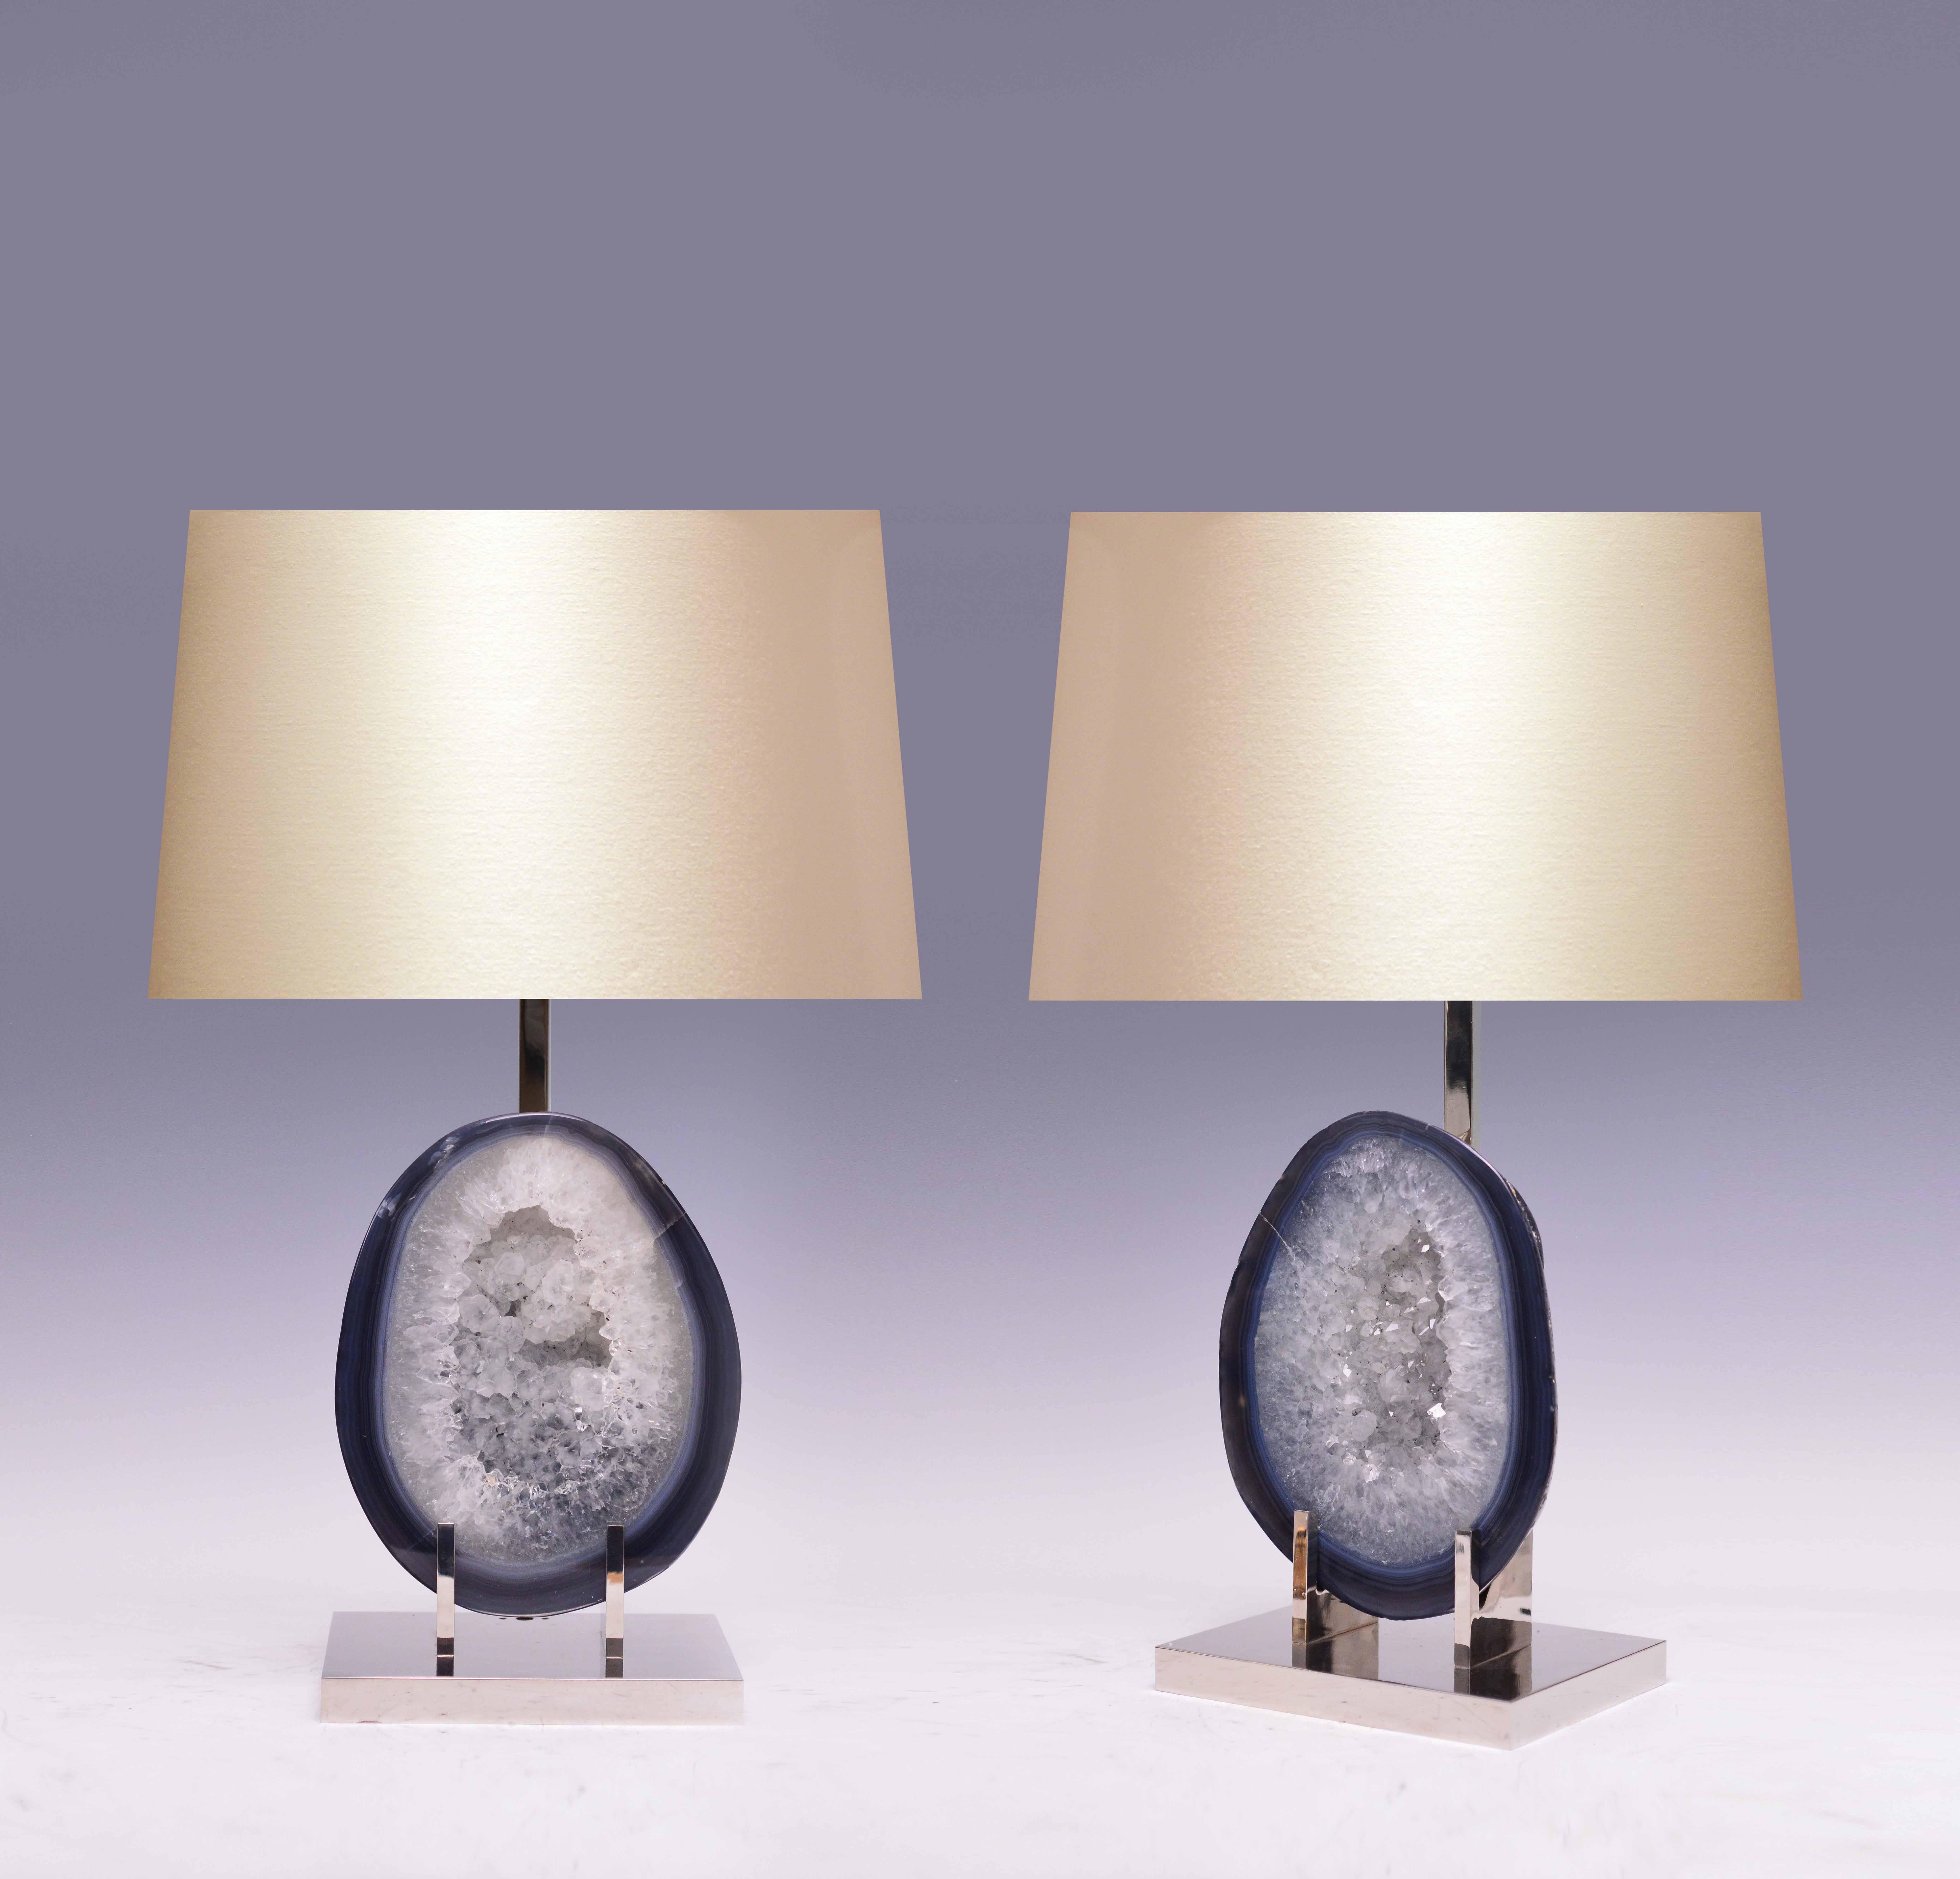 Pair of rare grayish blue natural agate mount as lamps with nickel plating stand, created by Phoenix Gallery.
(Lampshade not included)